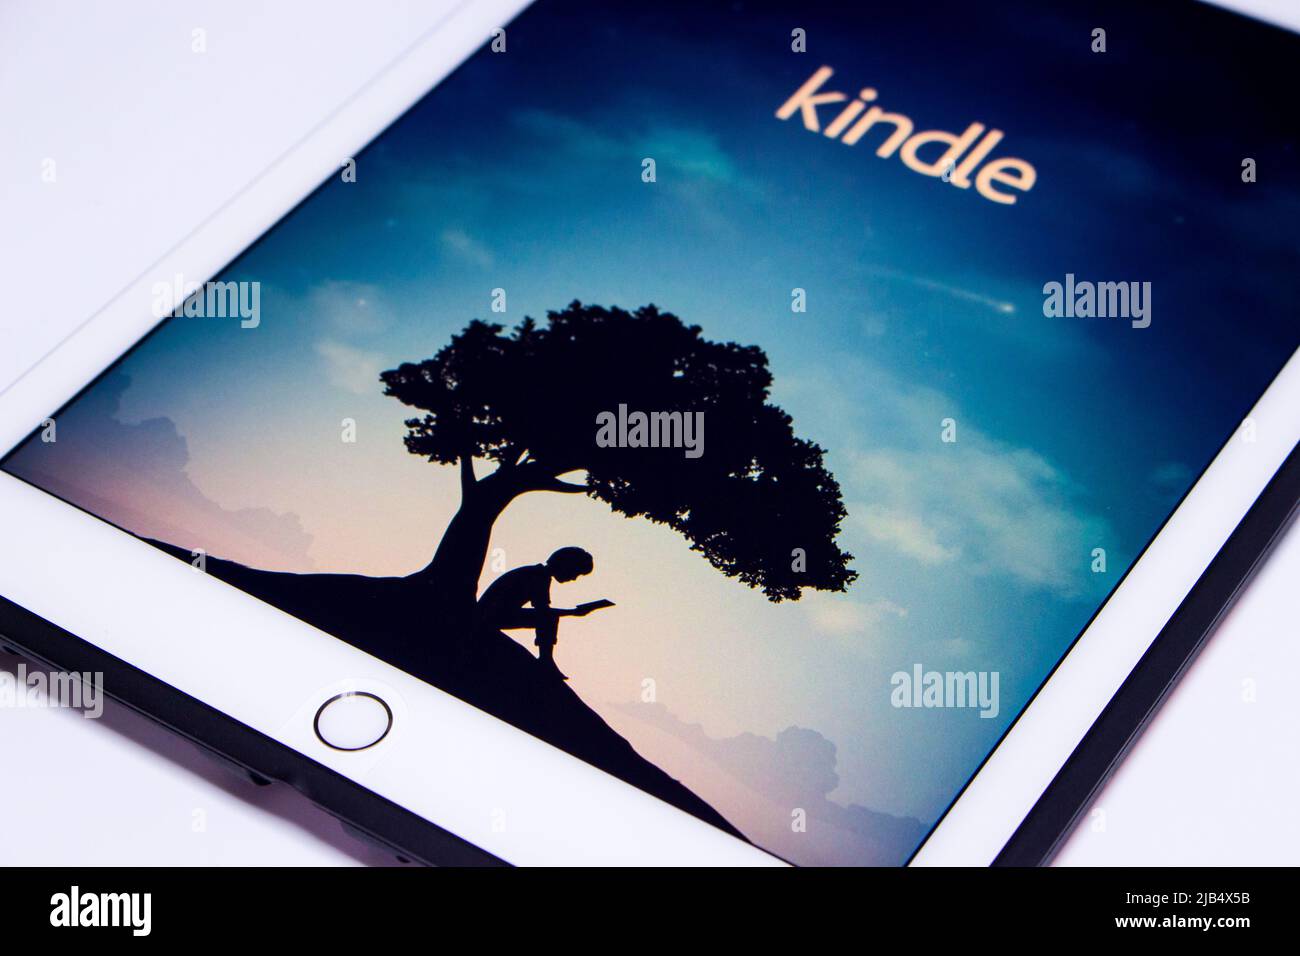 Kumamoto, Japan - Feb 5 2020 : Kindle app, e-book reader by Amazon, on iPad. From Amazon website or Kindle Store, users can purchase an e-book Stock Photo